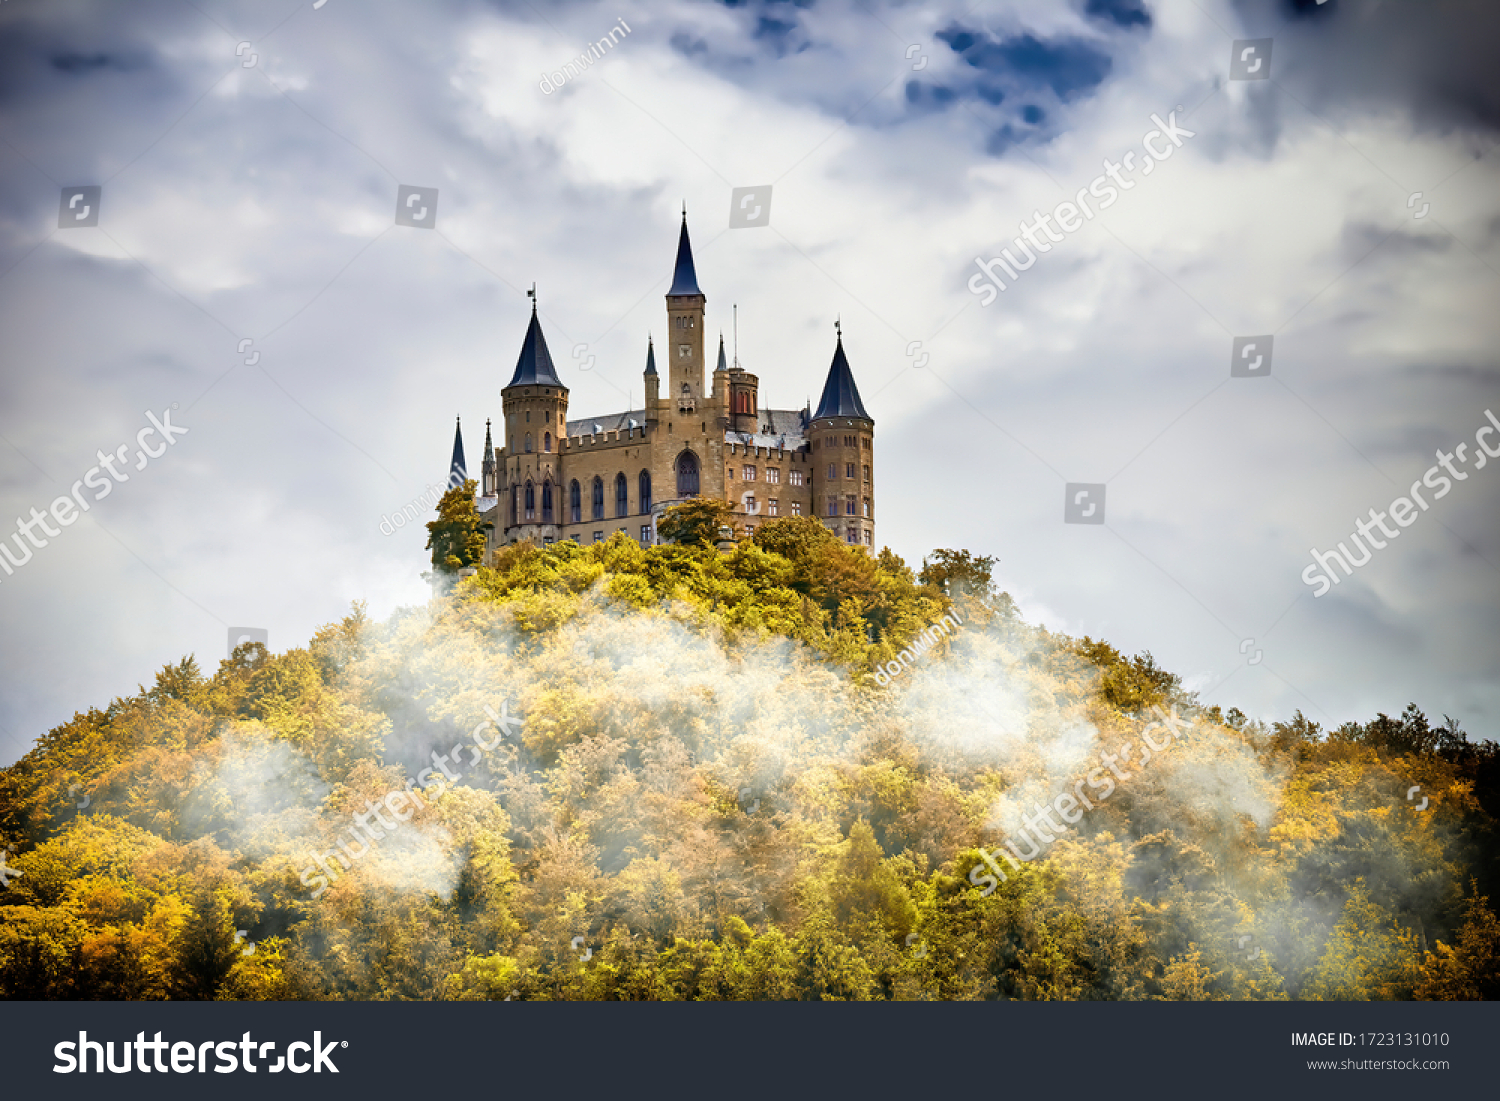 Castle on a wooded mountain in the fog under clouds, Hohenzollern, Germany #1723131010